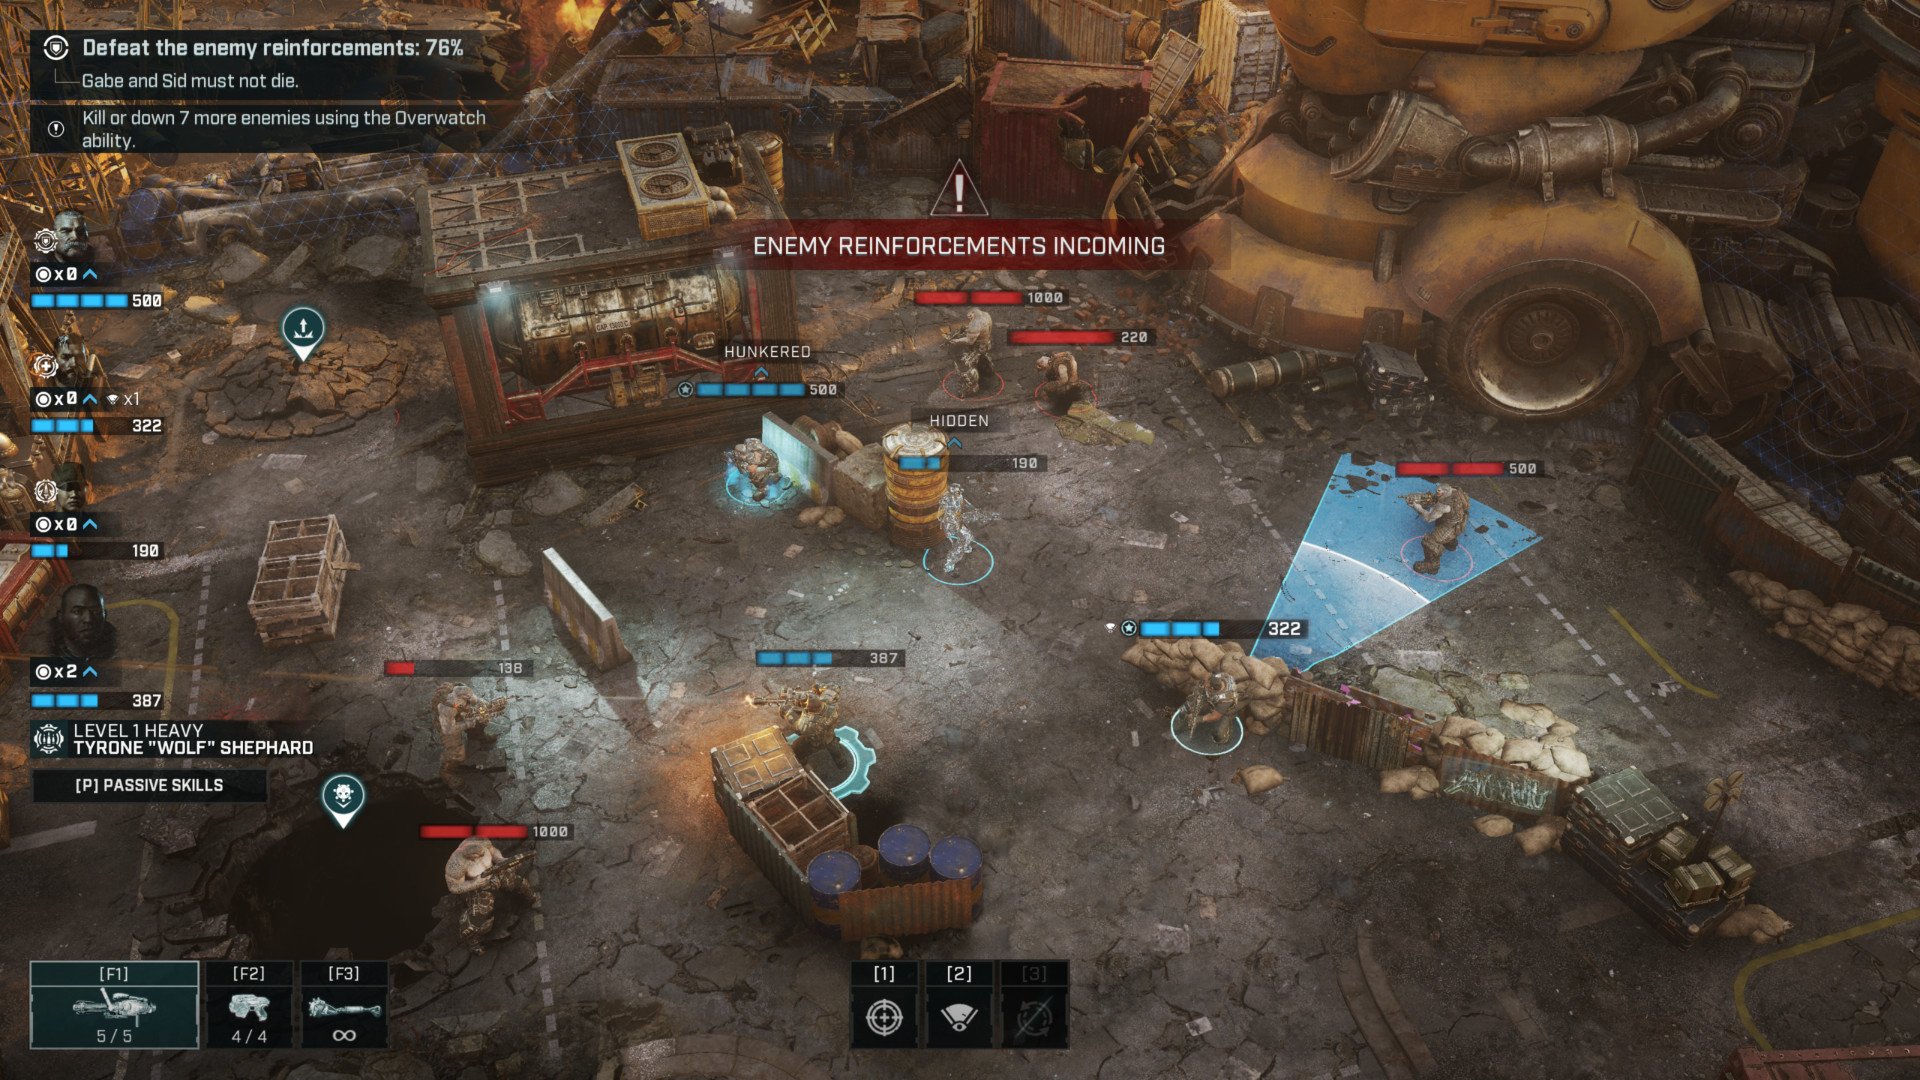 Gears Tactics Has A Huge Pile Of Graphics And Ui Settings For Pc Images, Photos, Reviews